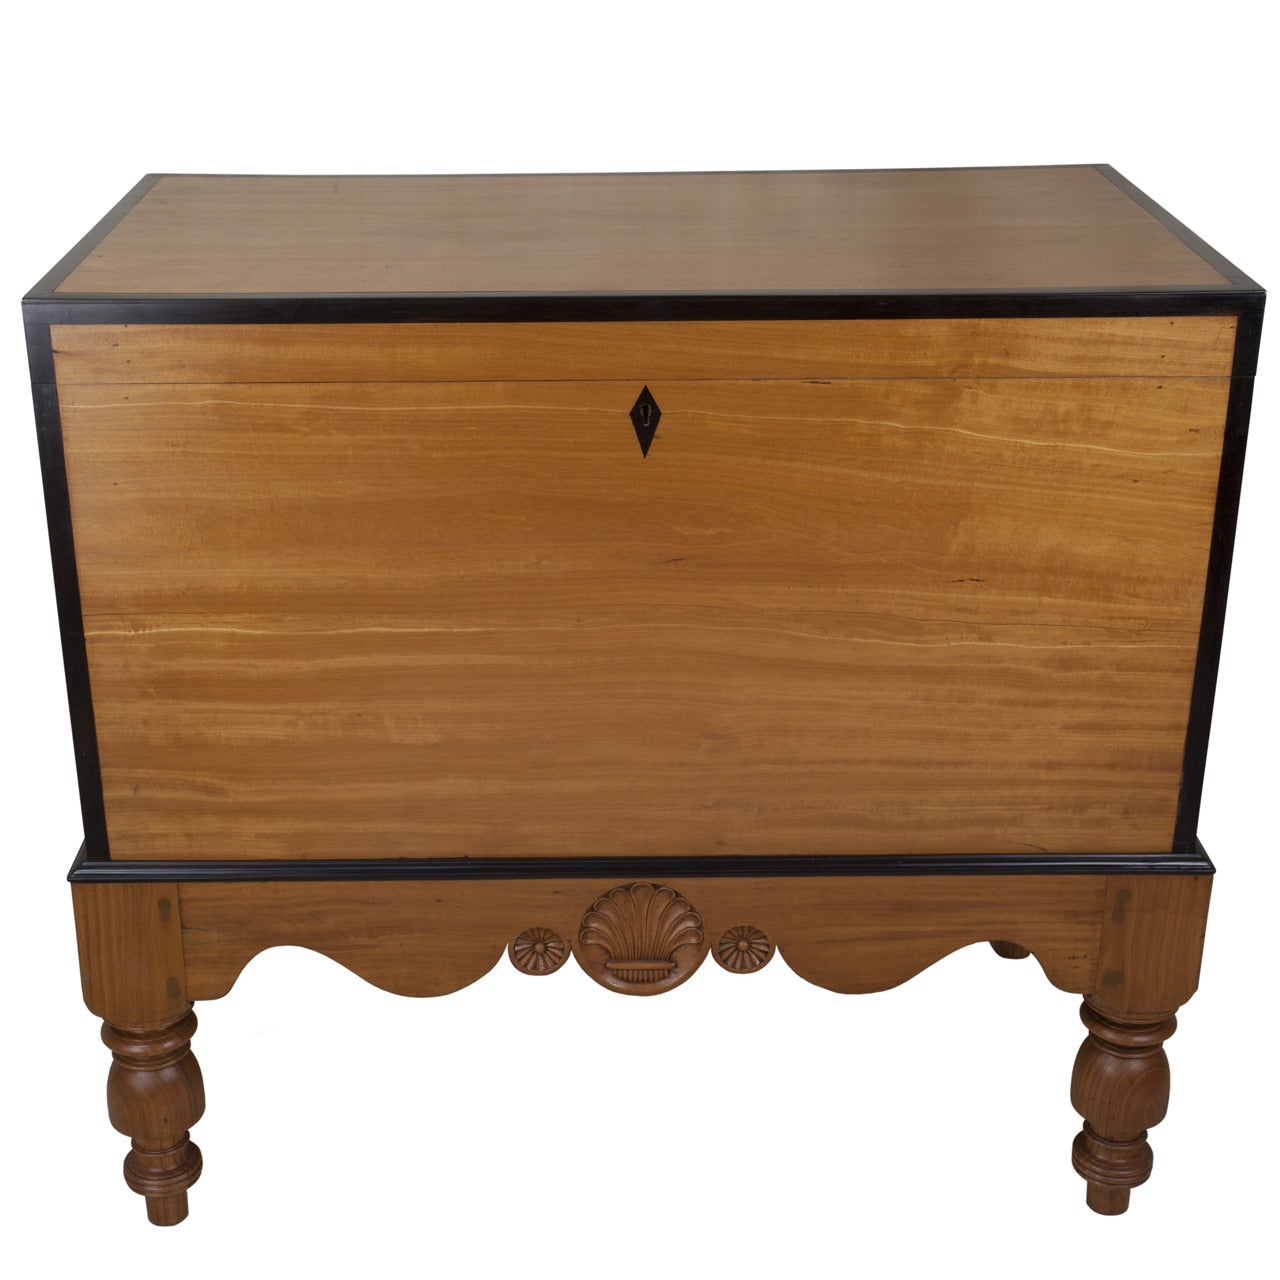 Early 1900s Satinwood and Ebony Chest on Stand, Colonial British